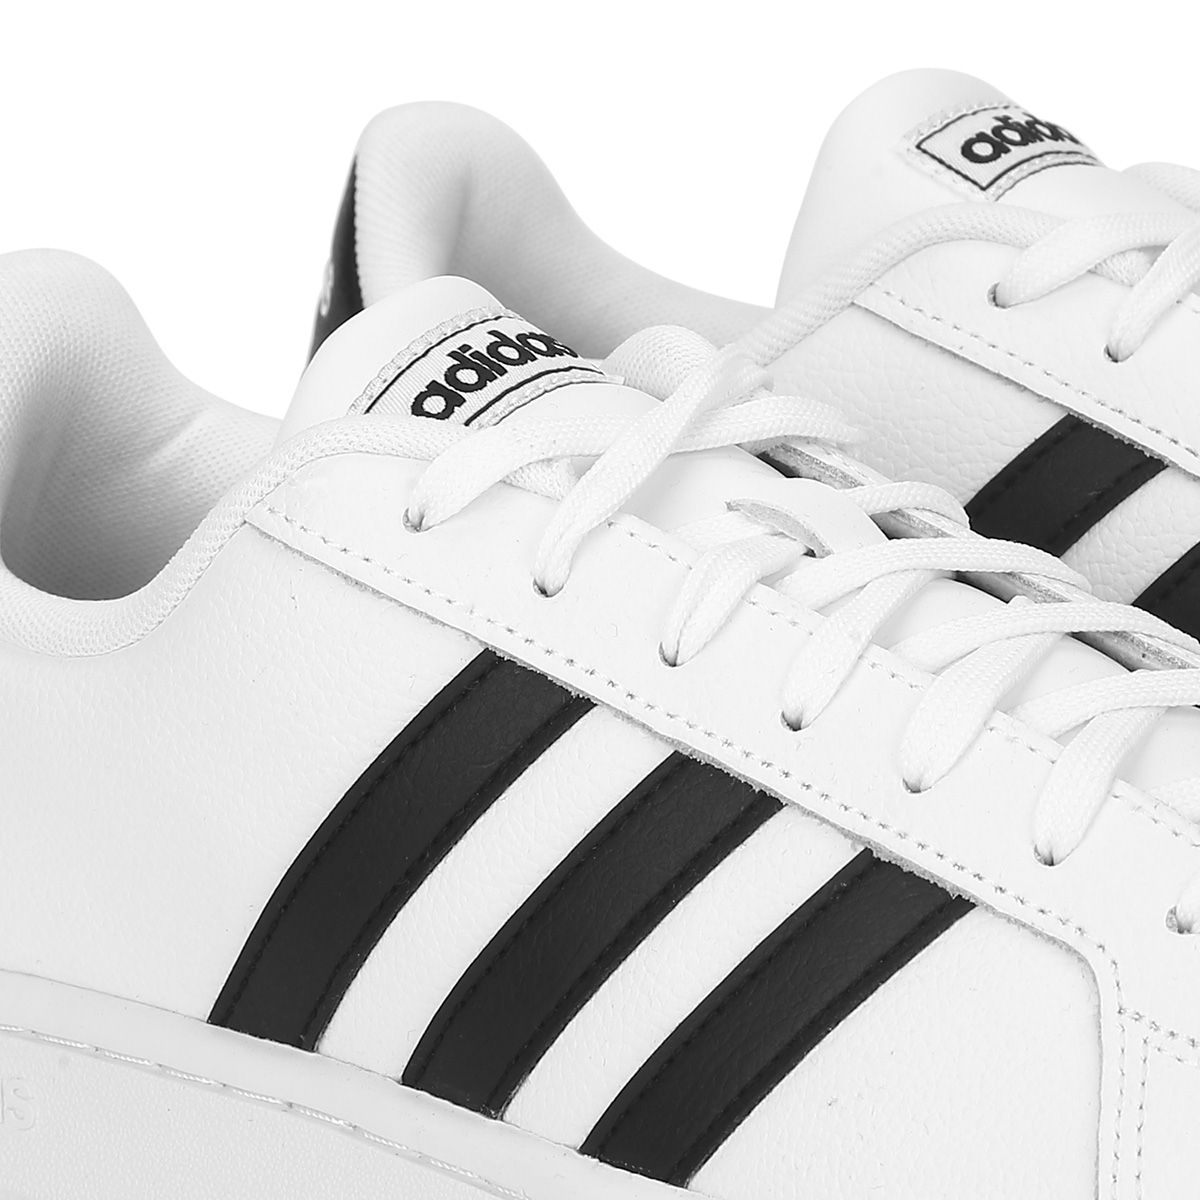 adidas Grand Court White Tennis Shoes: Buy adidas Grand Court White ...